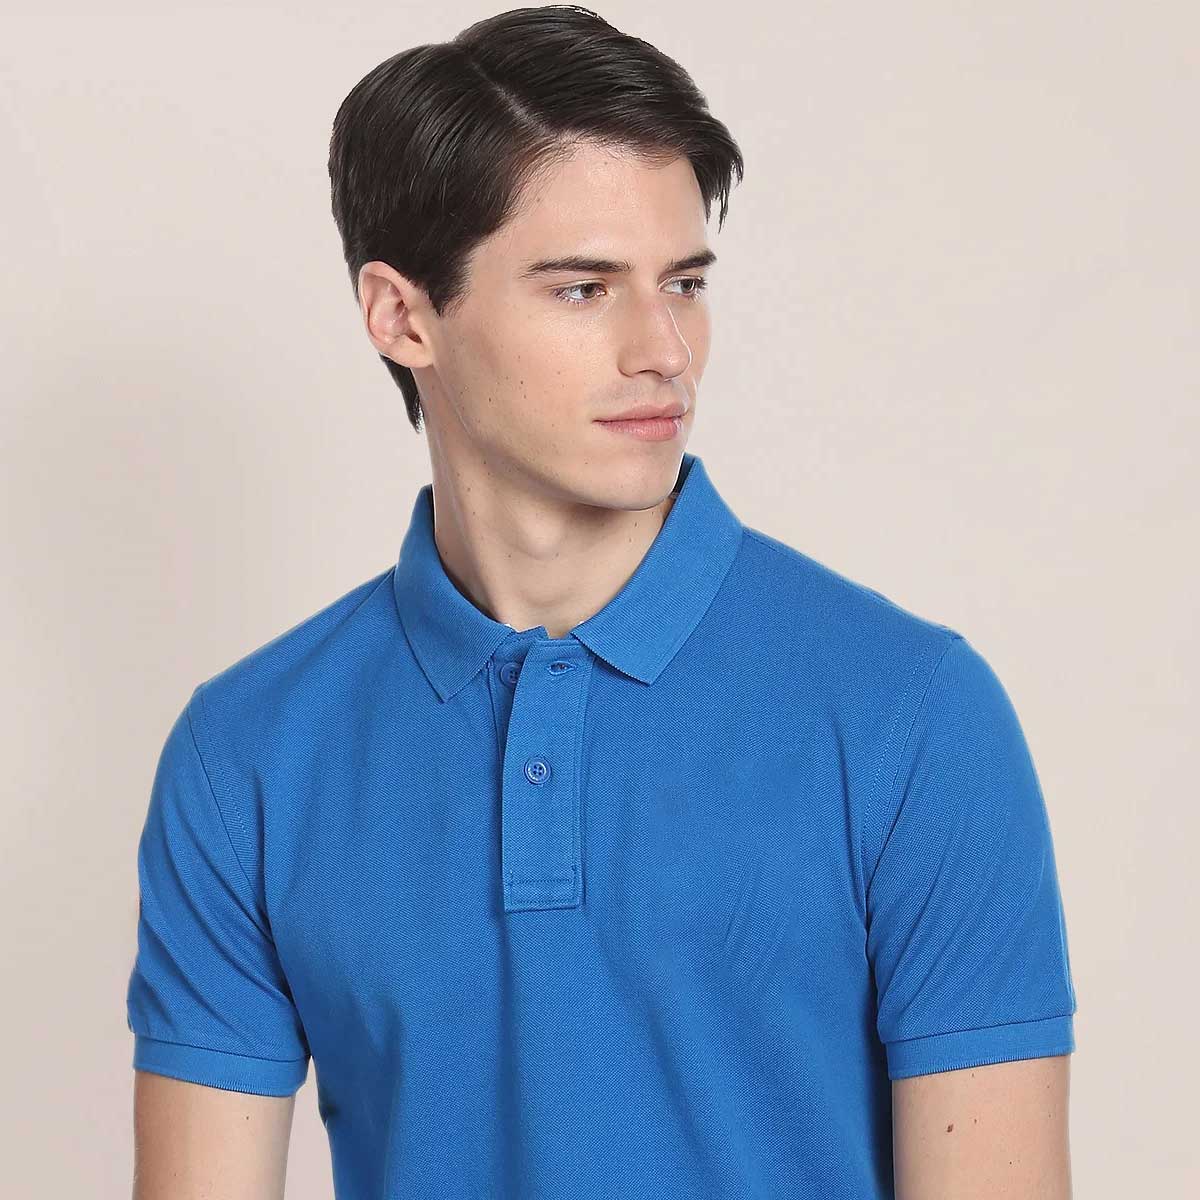 Polo Shirts Manufacturers in Solingen